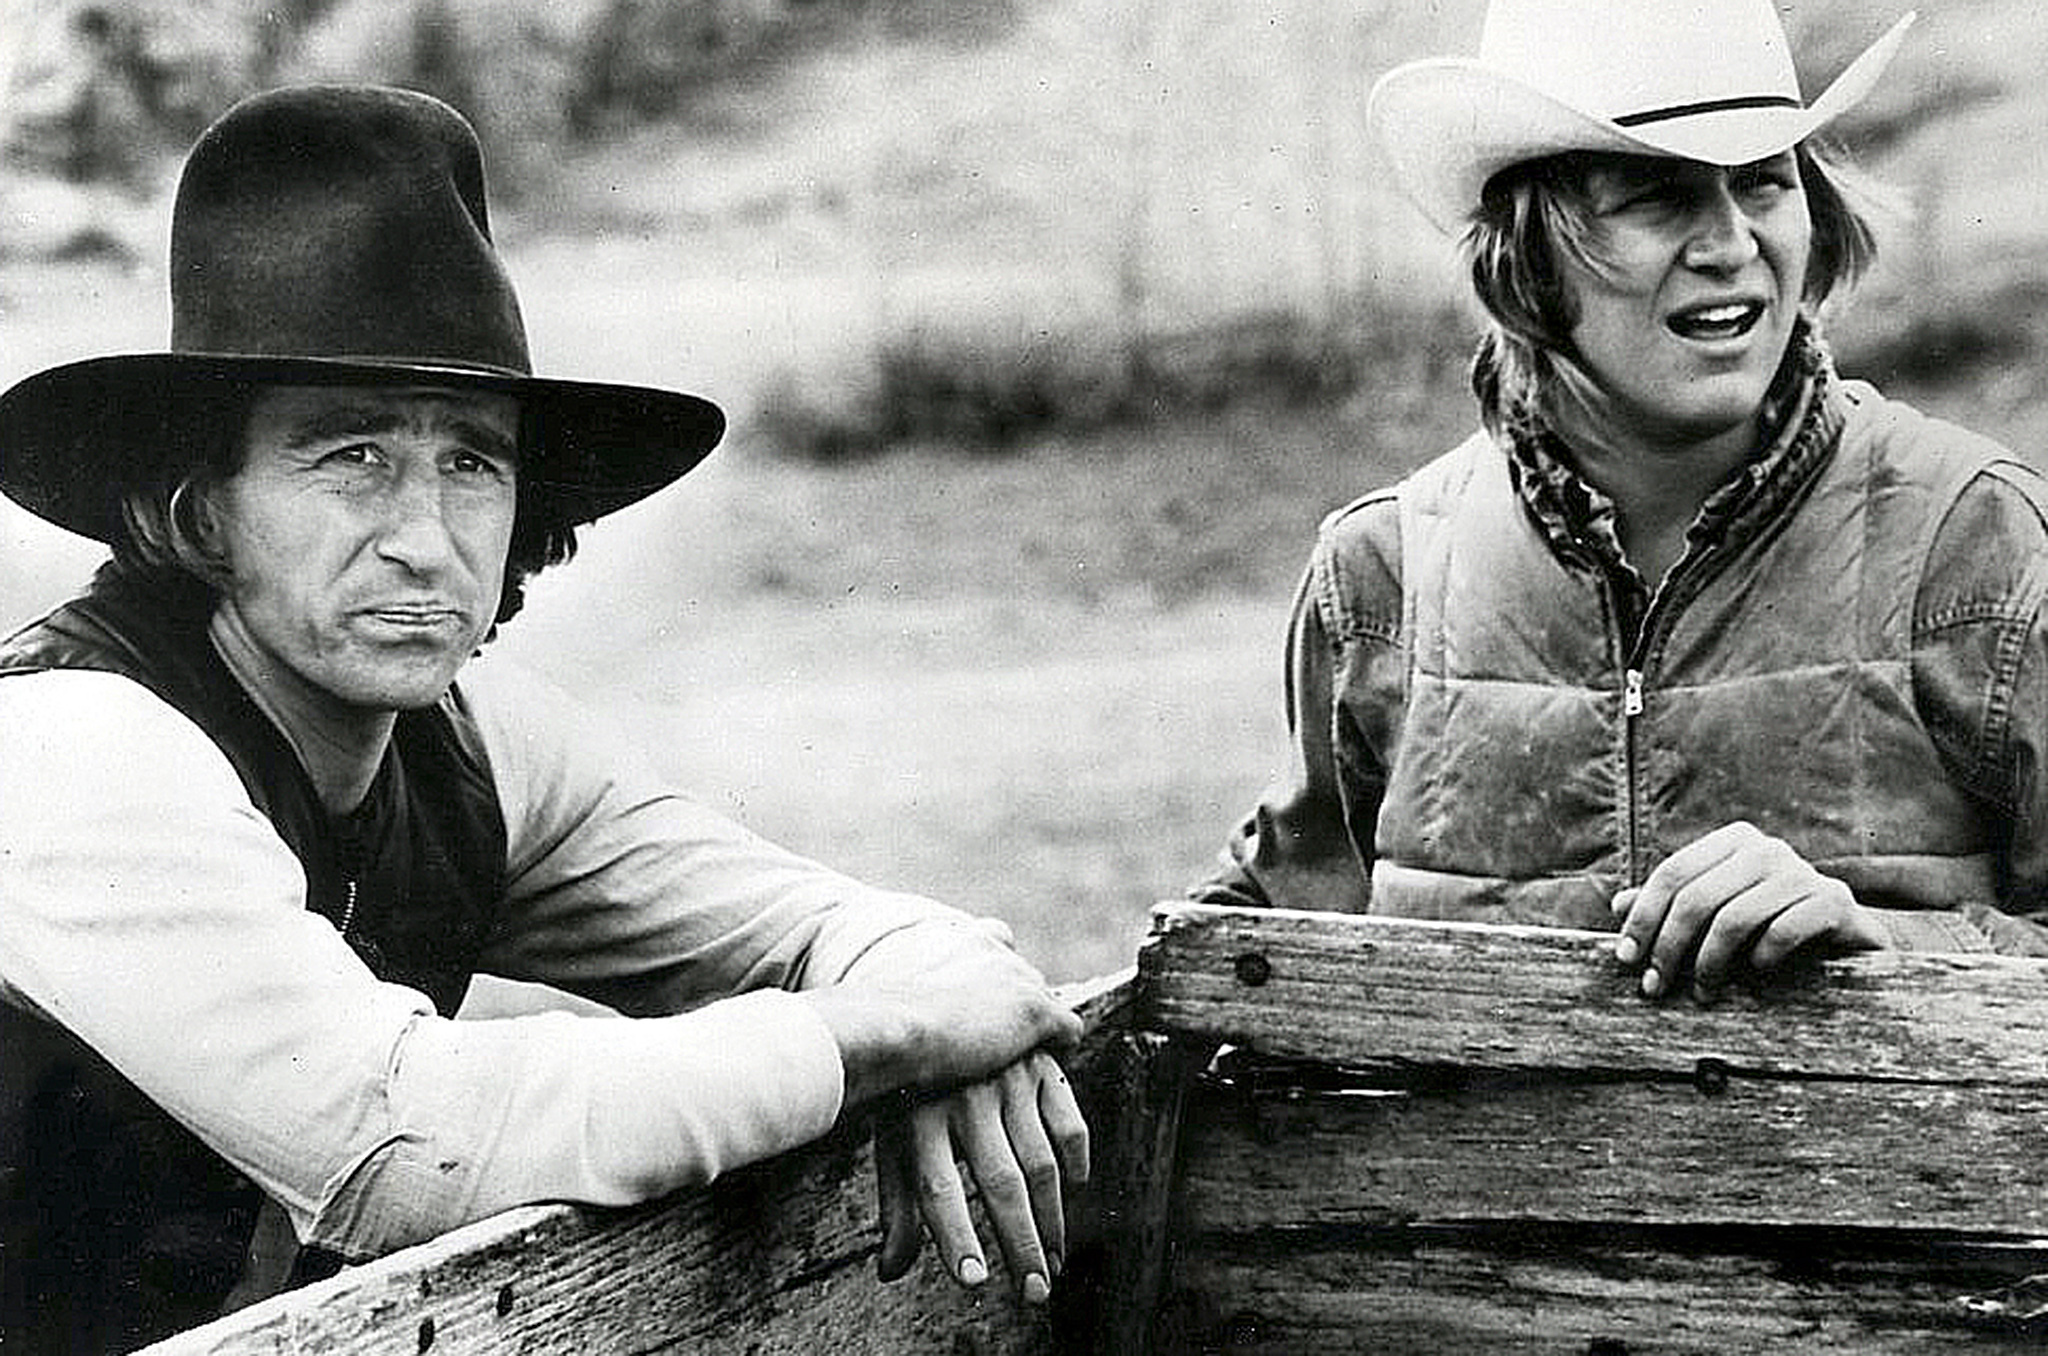 40 Best Western Movies of All Time - Cowboy Movies to Watch